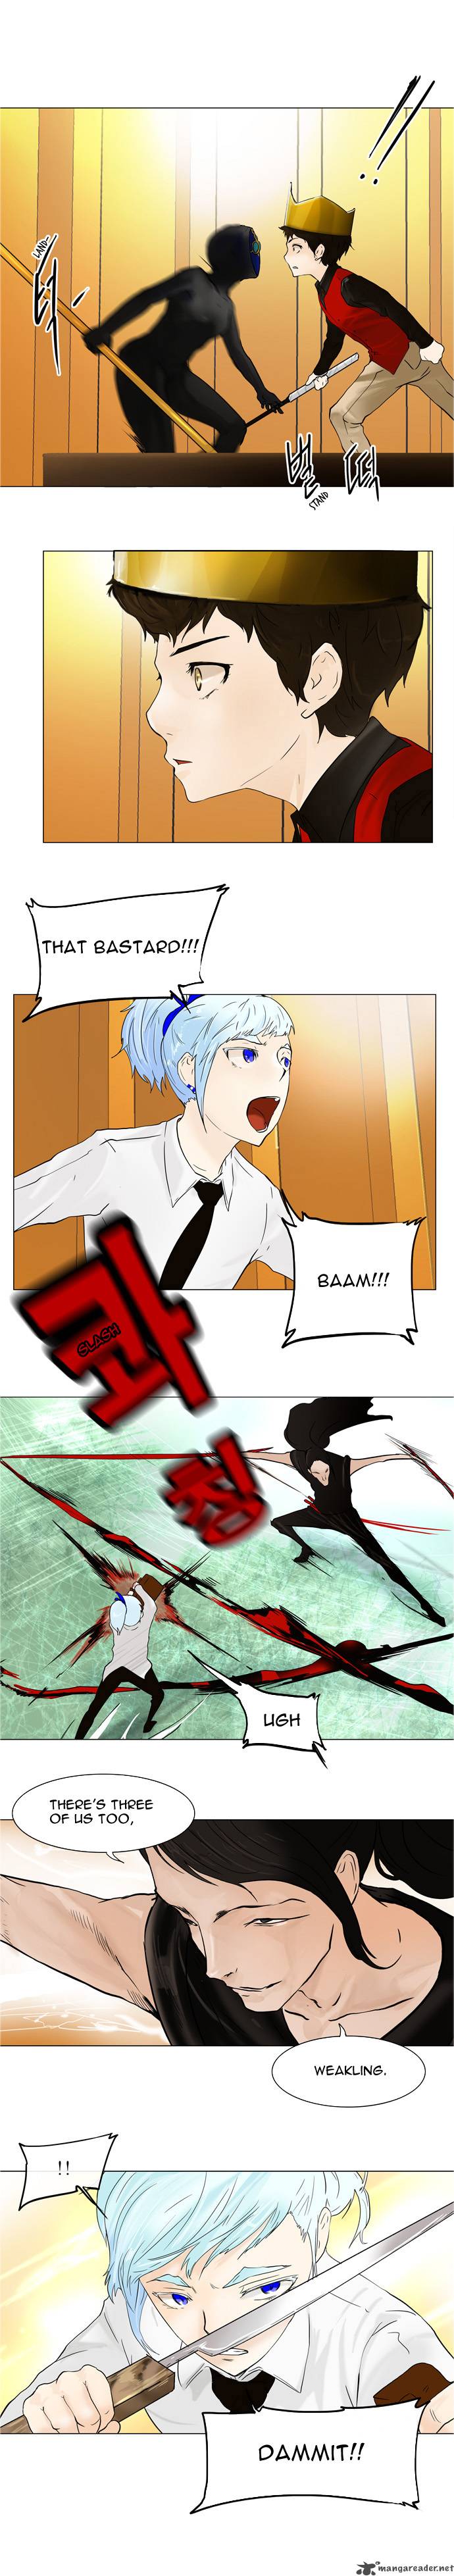 Tower Of God 24 5